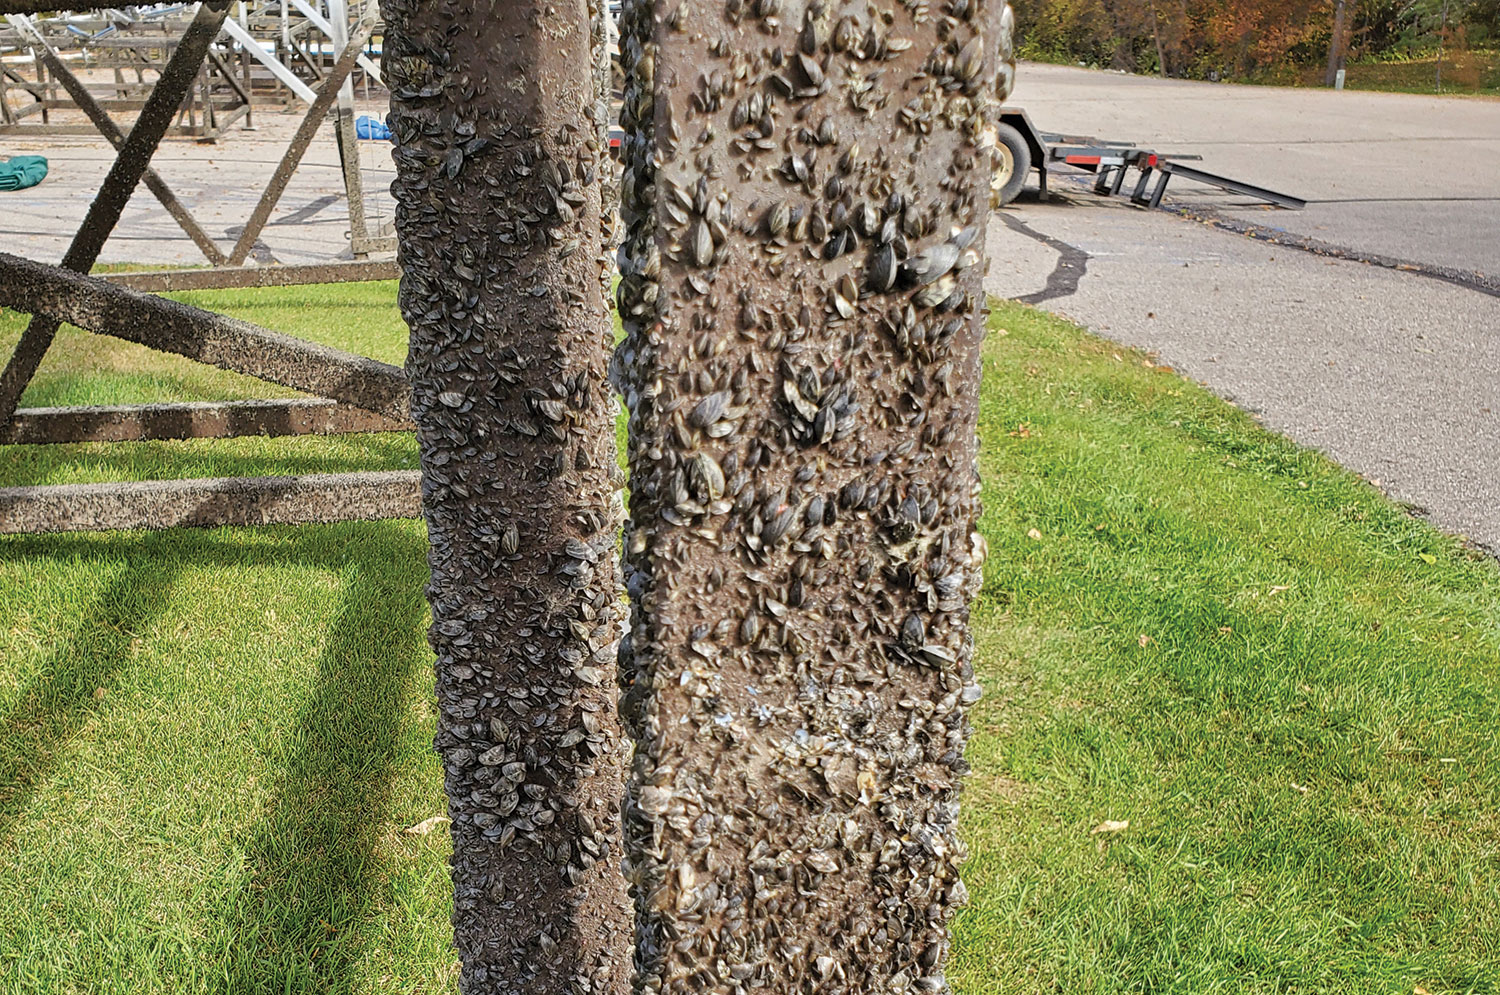 Zebra mussels on boat lift pulled from water